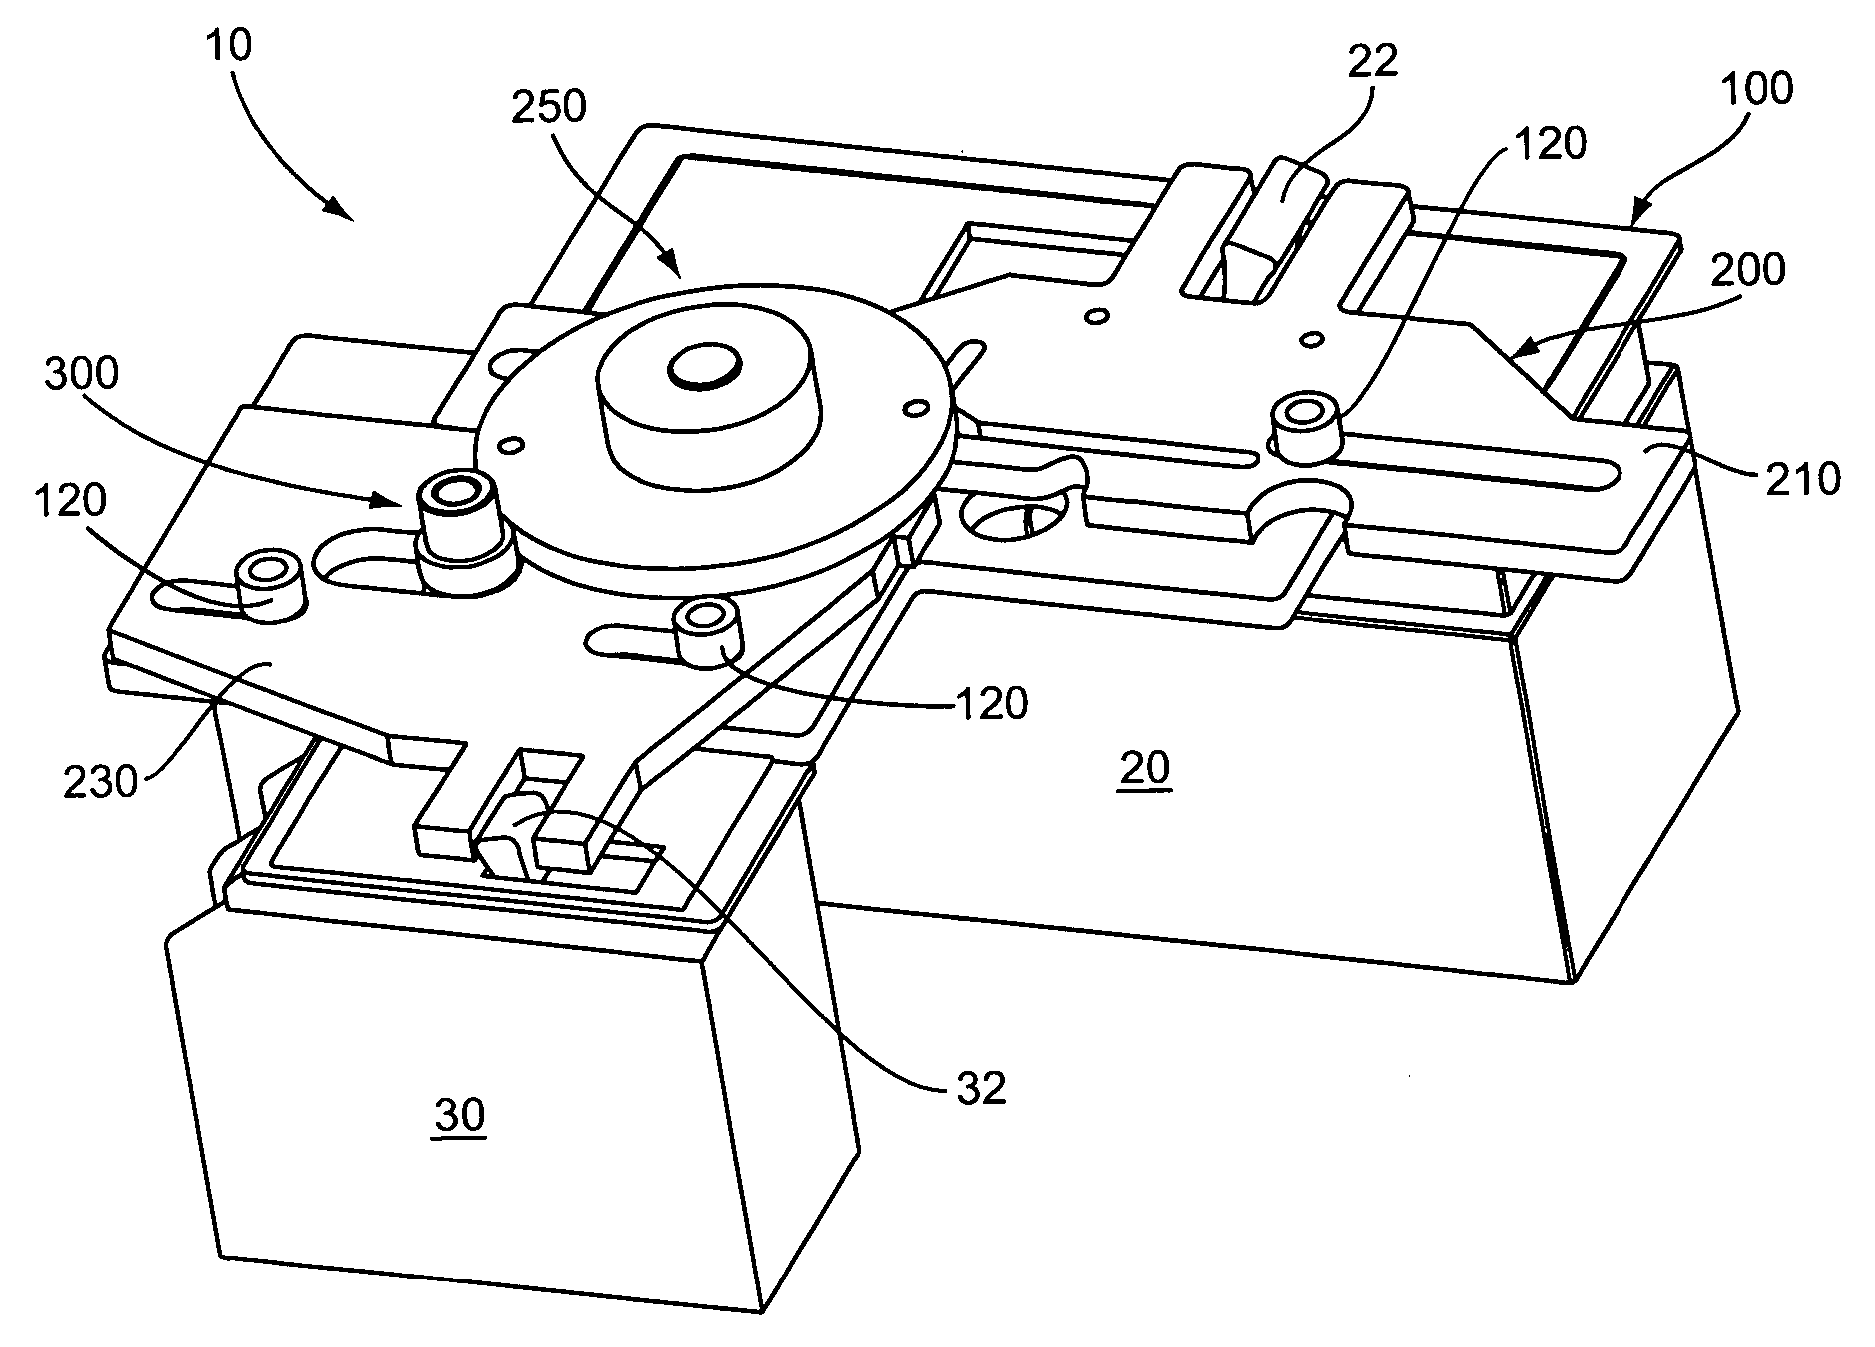 Switching mechanism with shock absorber